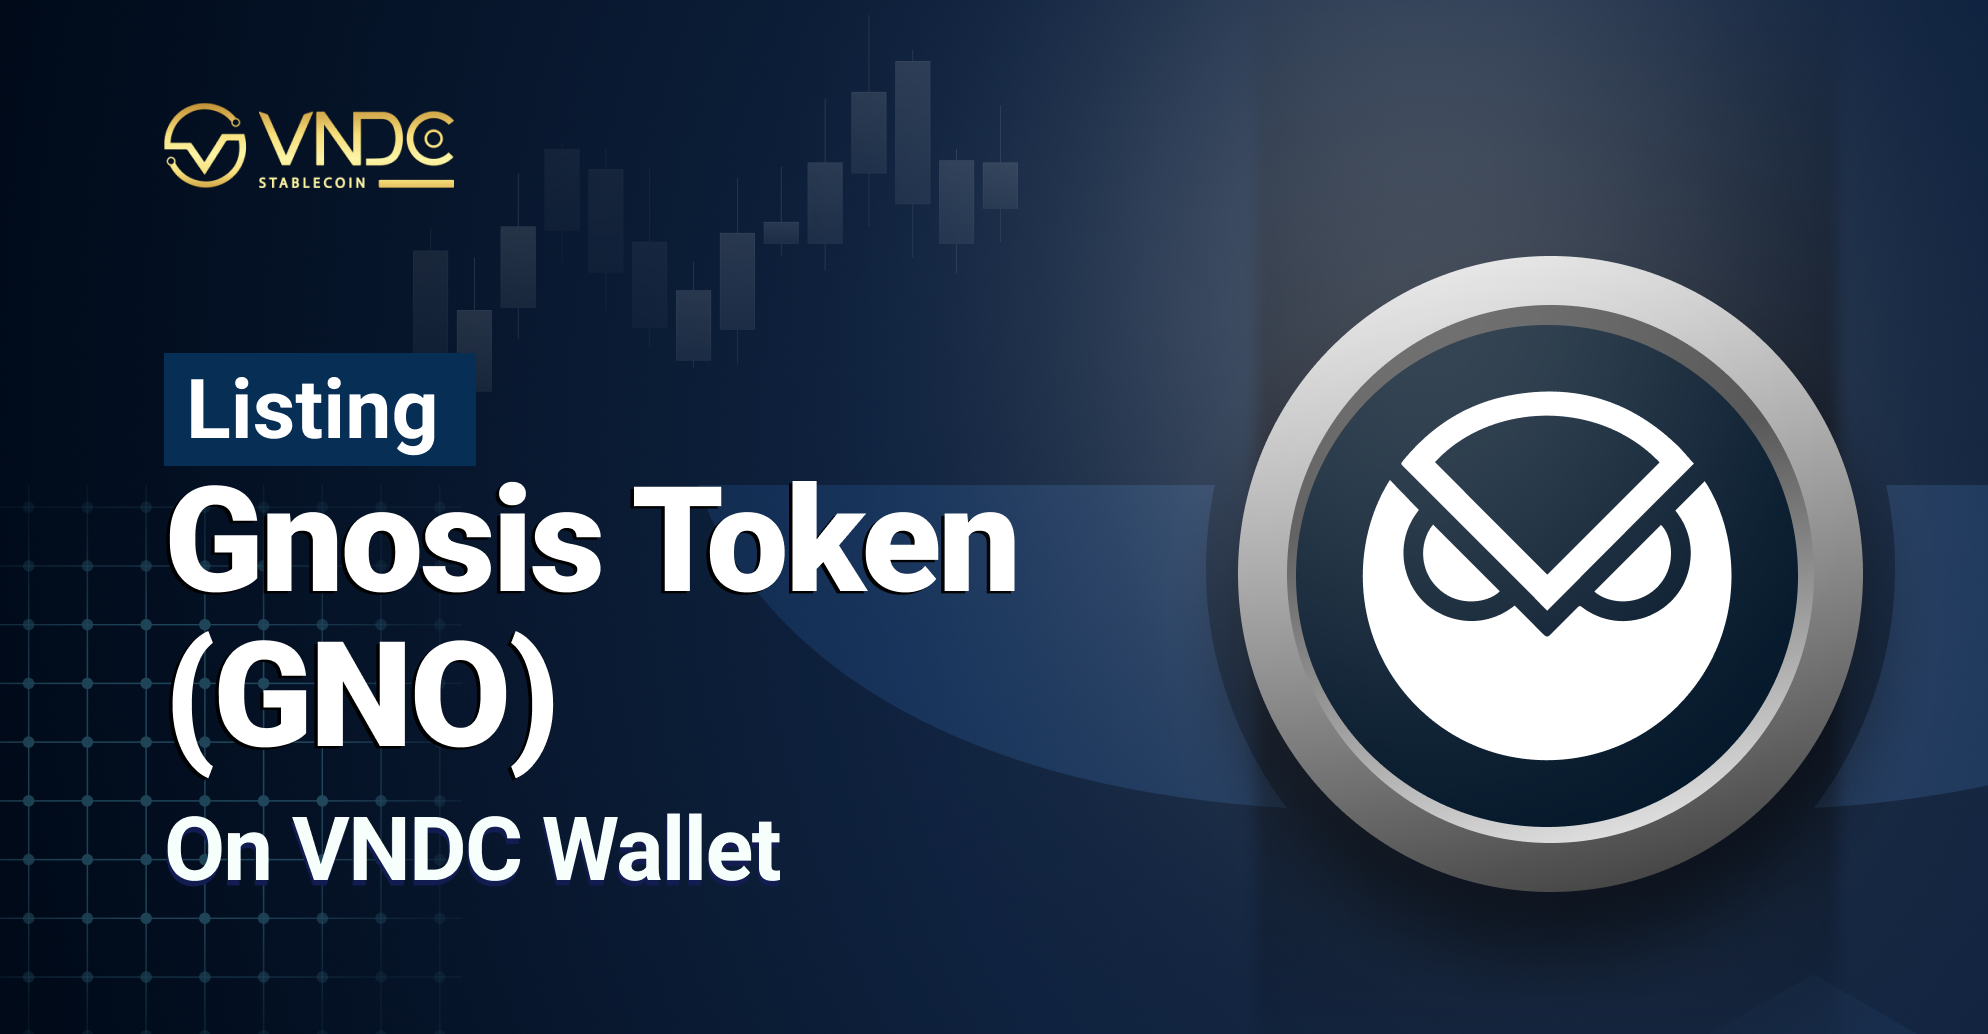 Listing Gnosis Token (GNO) on VNDC Wallet